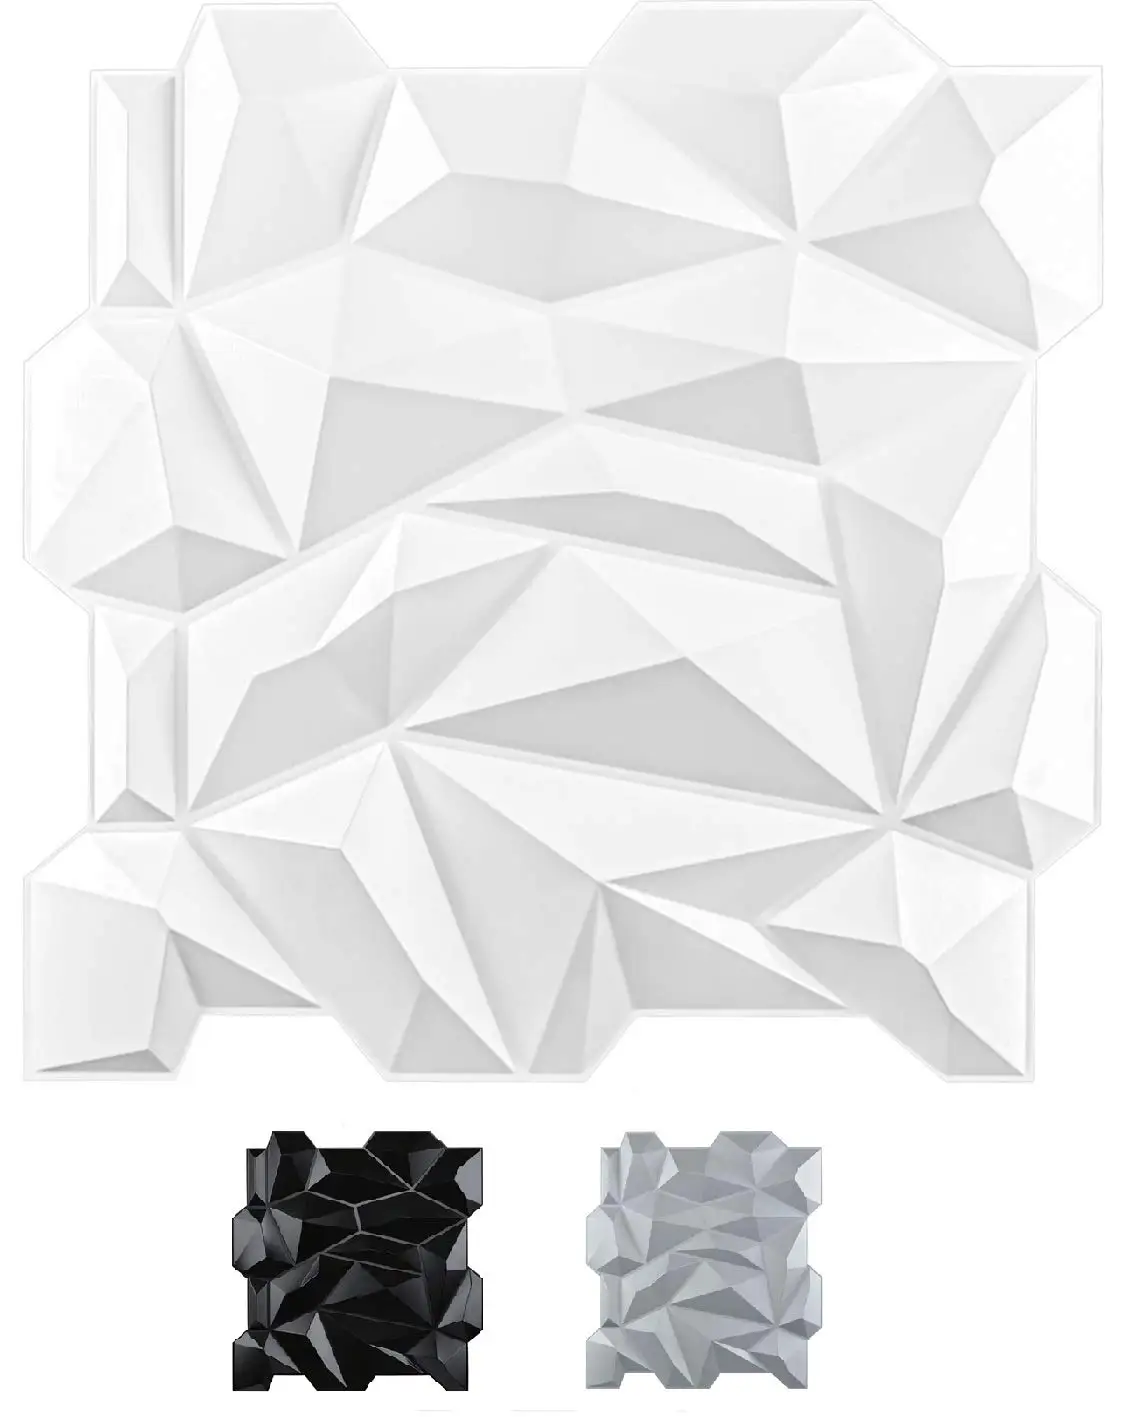 50x50cm Plastic 3D Diamond Wall Panels Jagged Matching-Matt White for Living Room Bedroom TV Background Ceiling Pack of 12 Tiles jagged alliance 2 wildfire pc